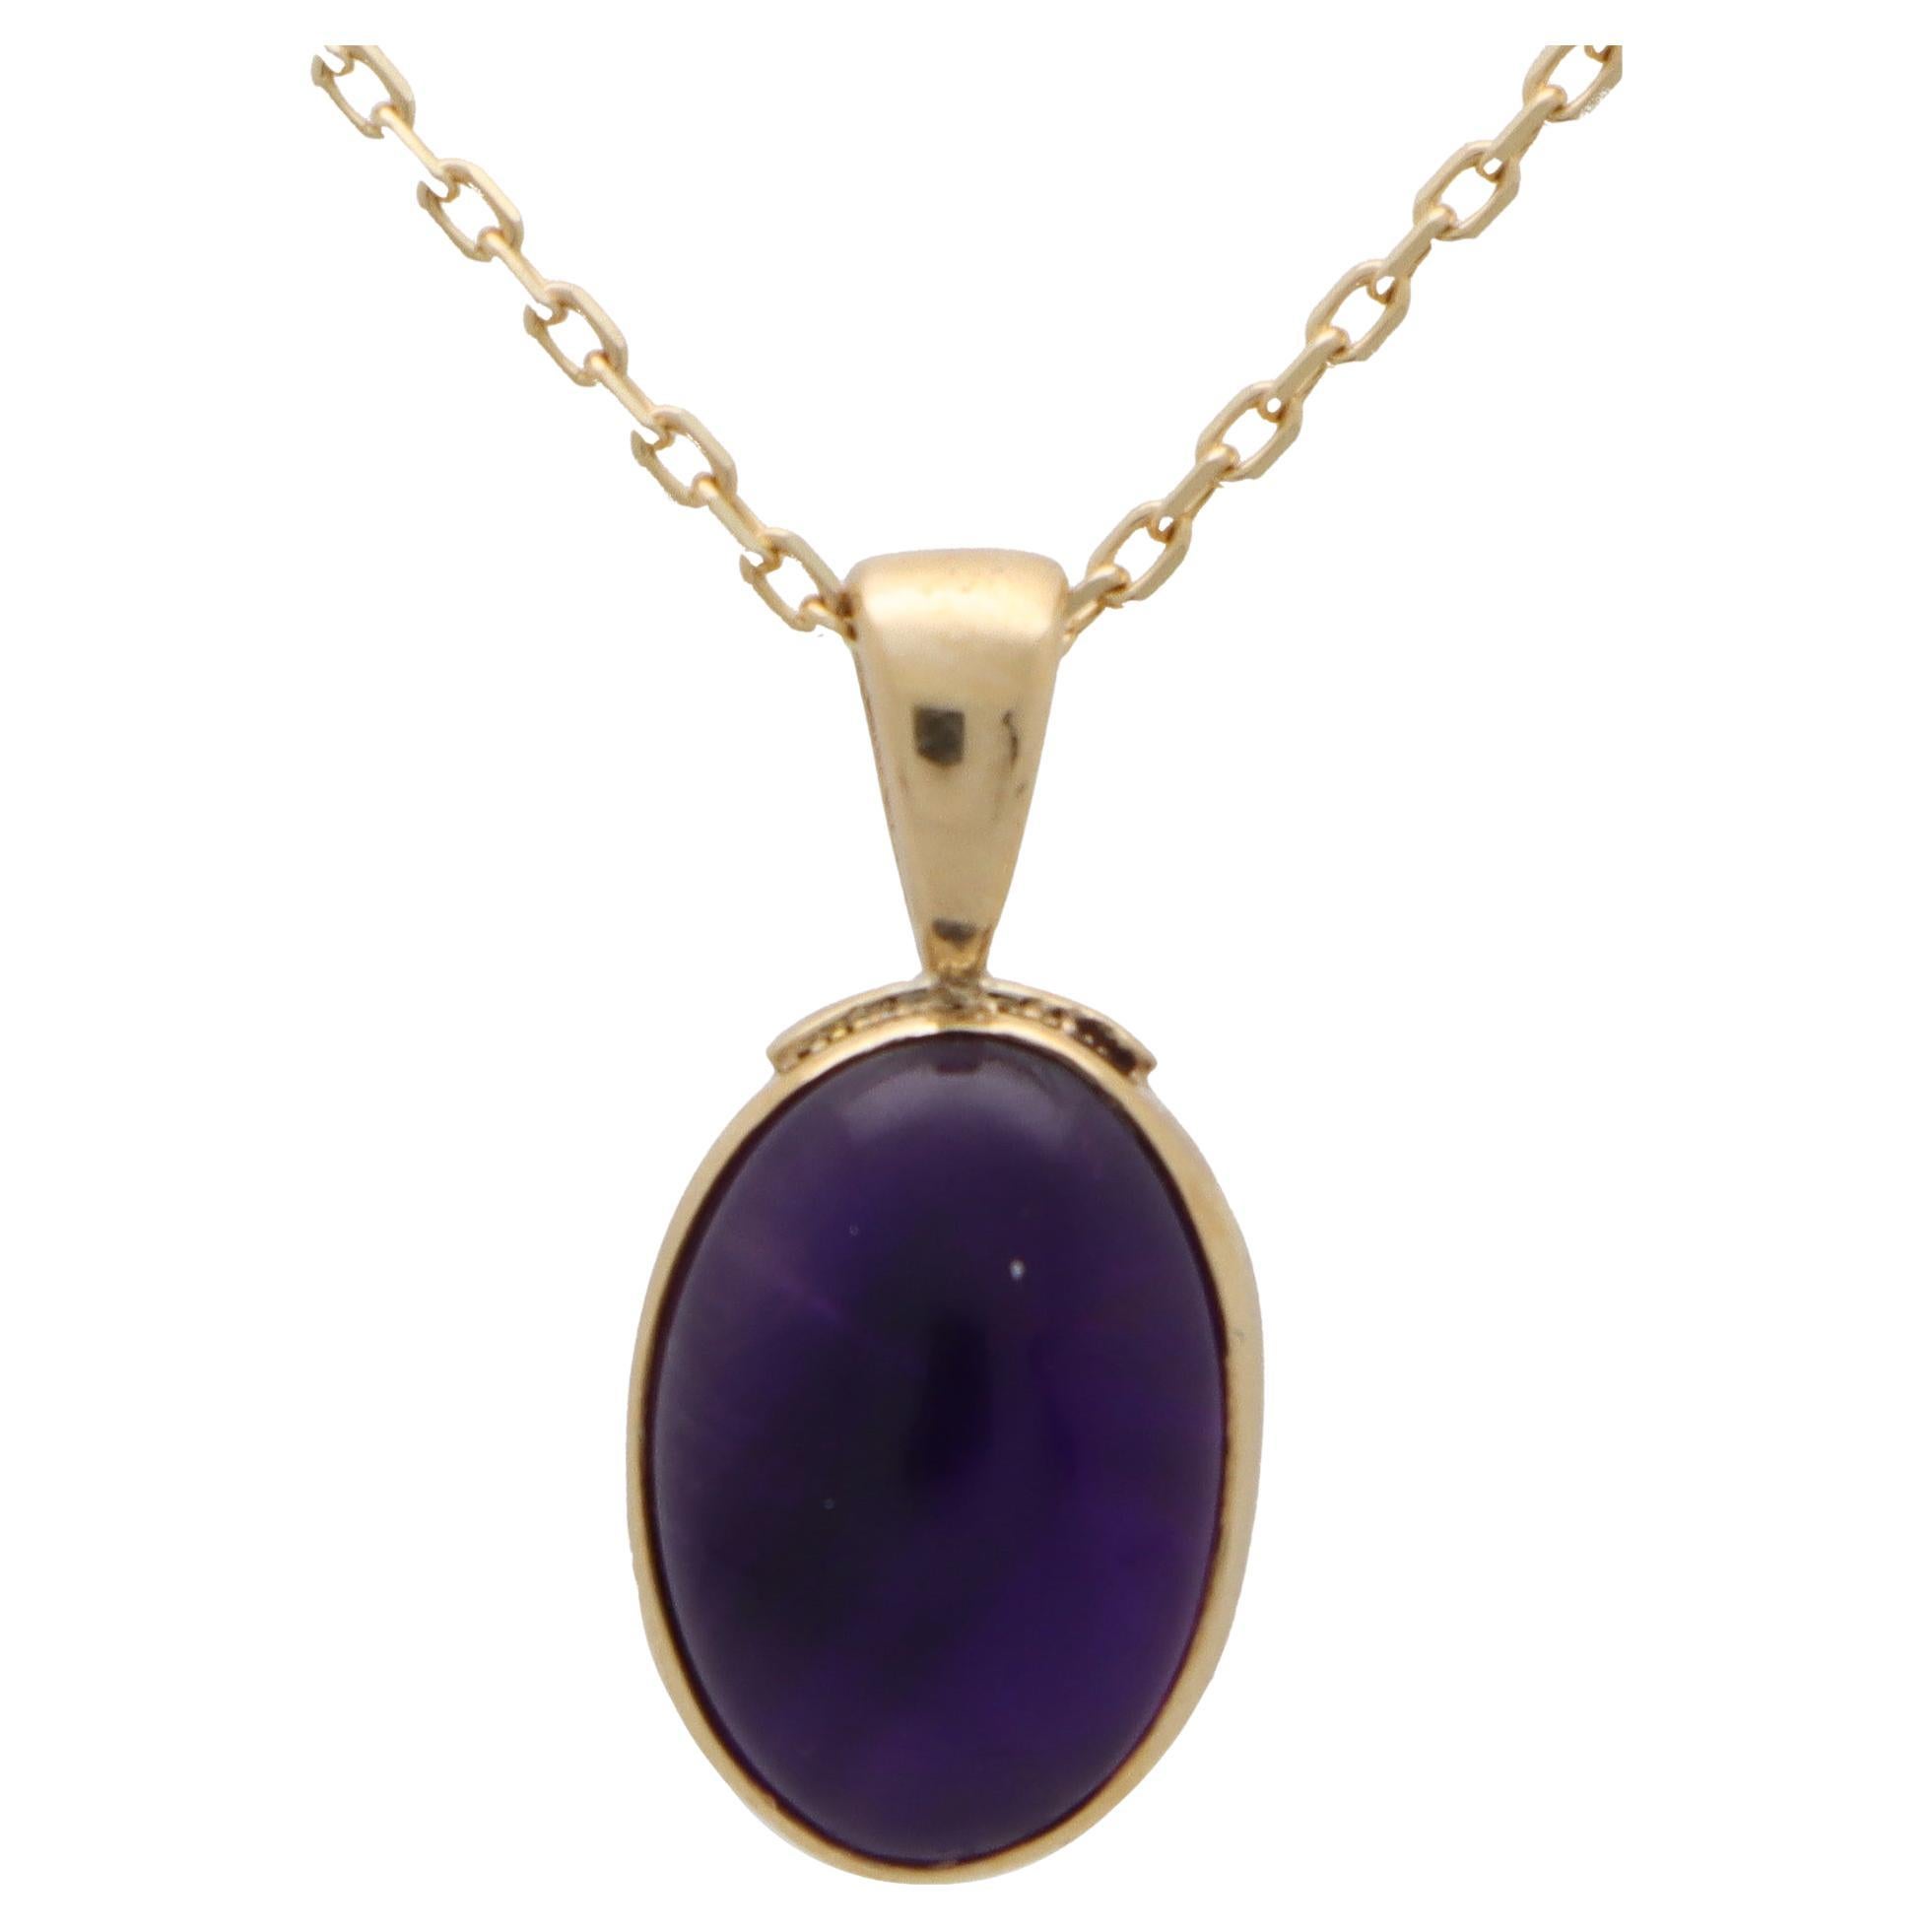 Vintage Amethyst Oval Pendant Necklace in 9k Yellow Gold